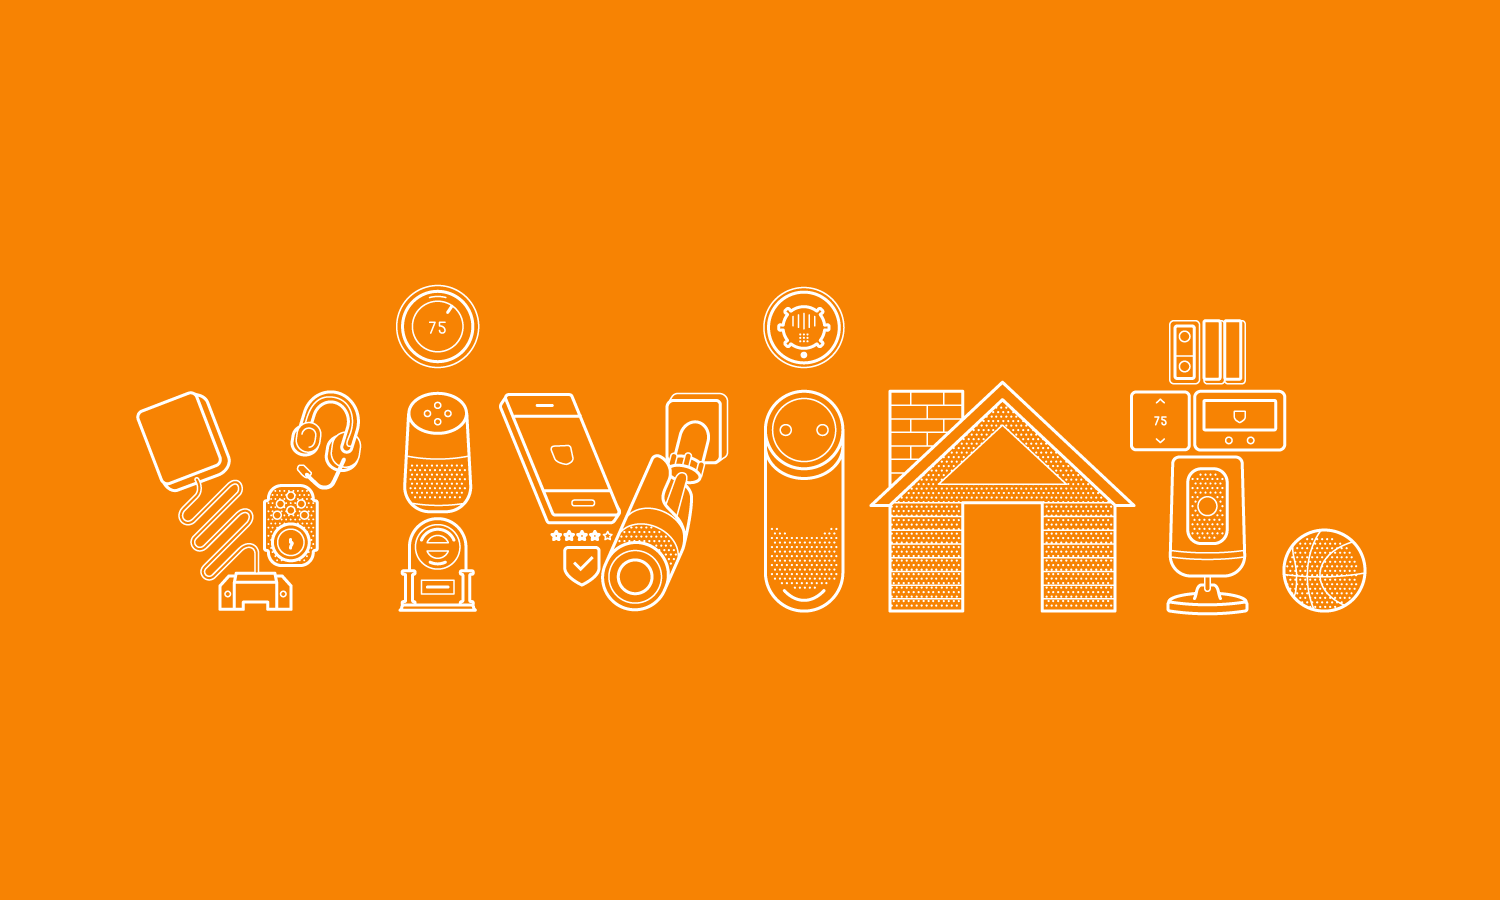 Vivint Logo - 10 Things You Probably Didn't Know About Vivint Smart Home